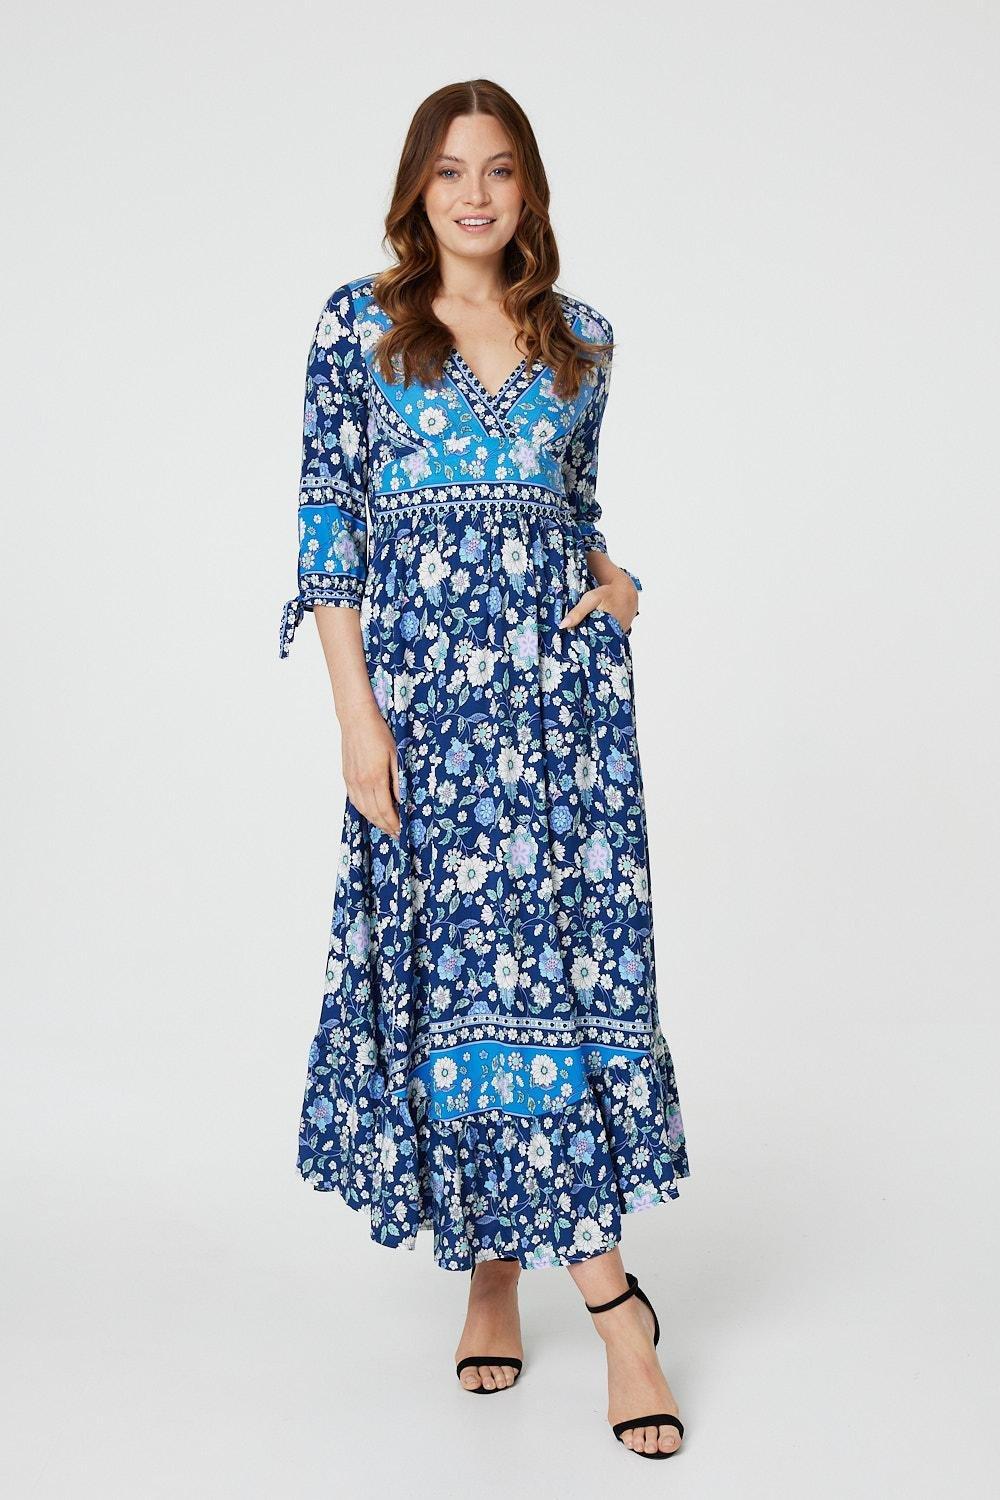 Floral Tie Sleeve Empire Dress